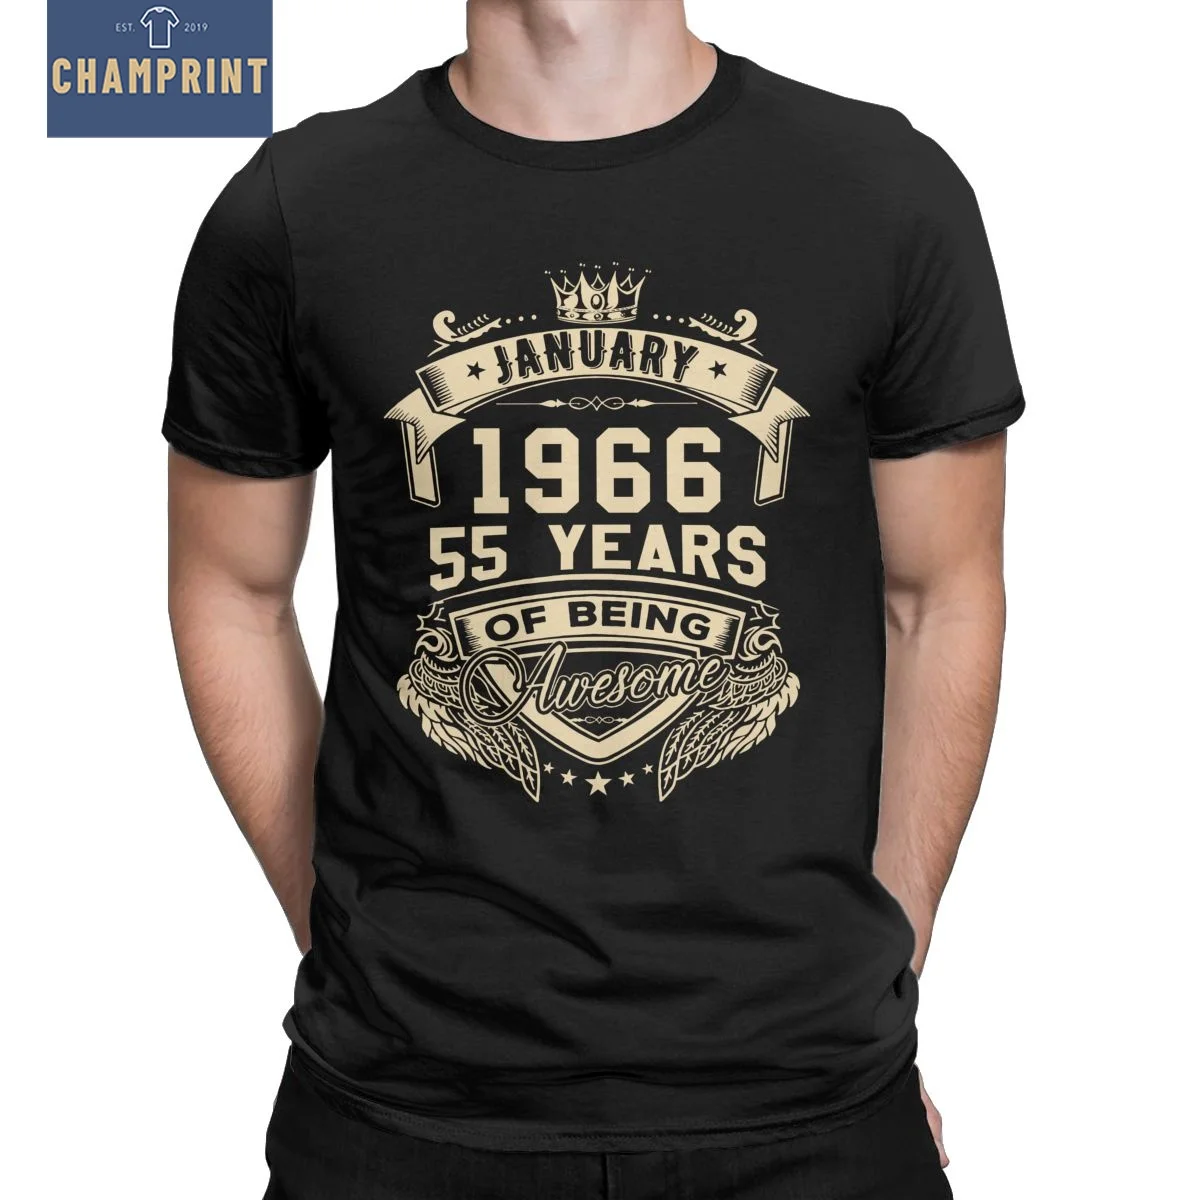 

Men's T-Shirt Born In January 1966 55 Years Of Being Awesome Limited Pure Cotton Tees 55th Birthday T Shirts Gift Idea Clothing